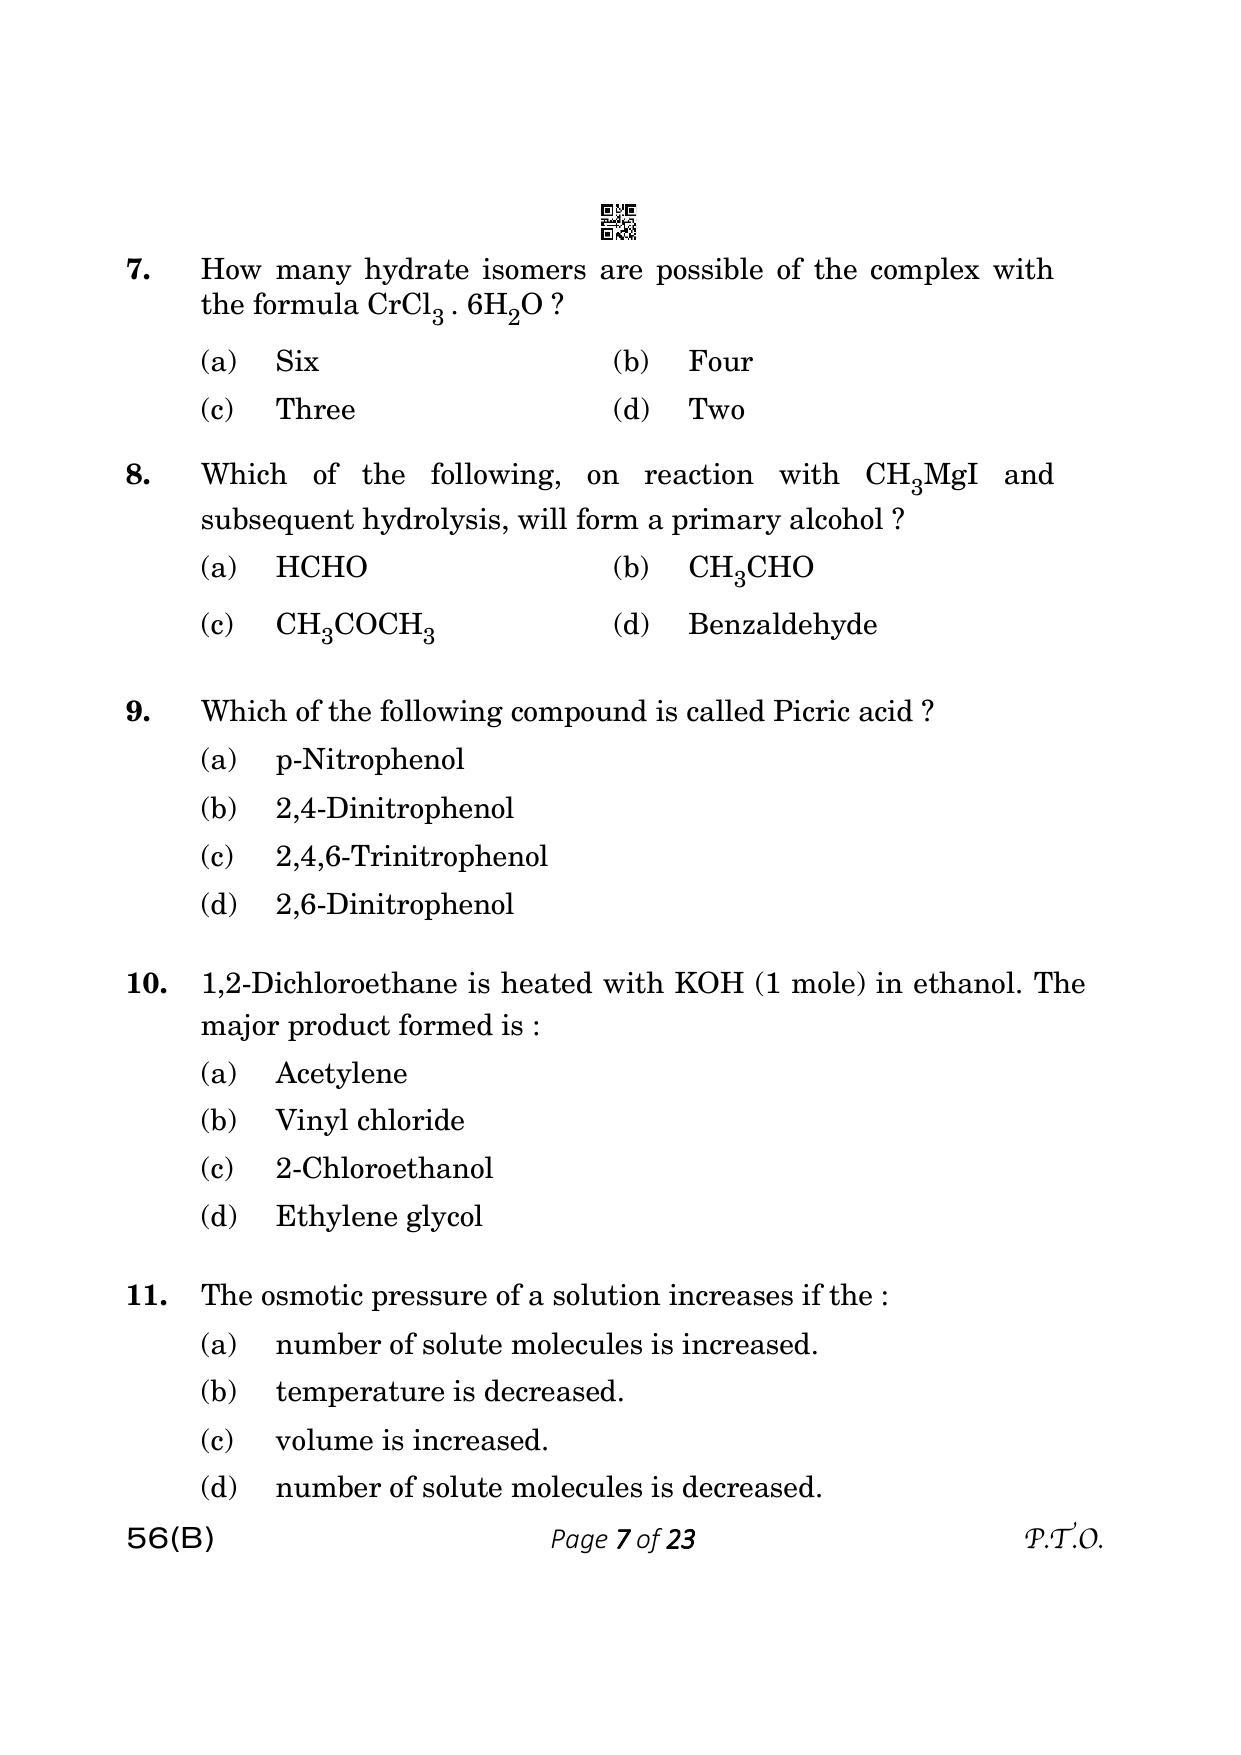 CBSE Class 12 56-B Chemistry 2023 (Compartment) Question Paper - Page 7